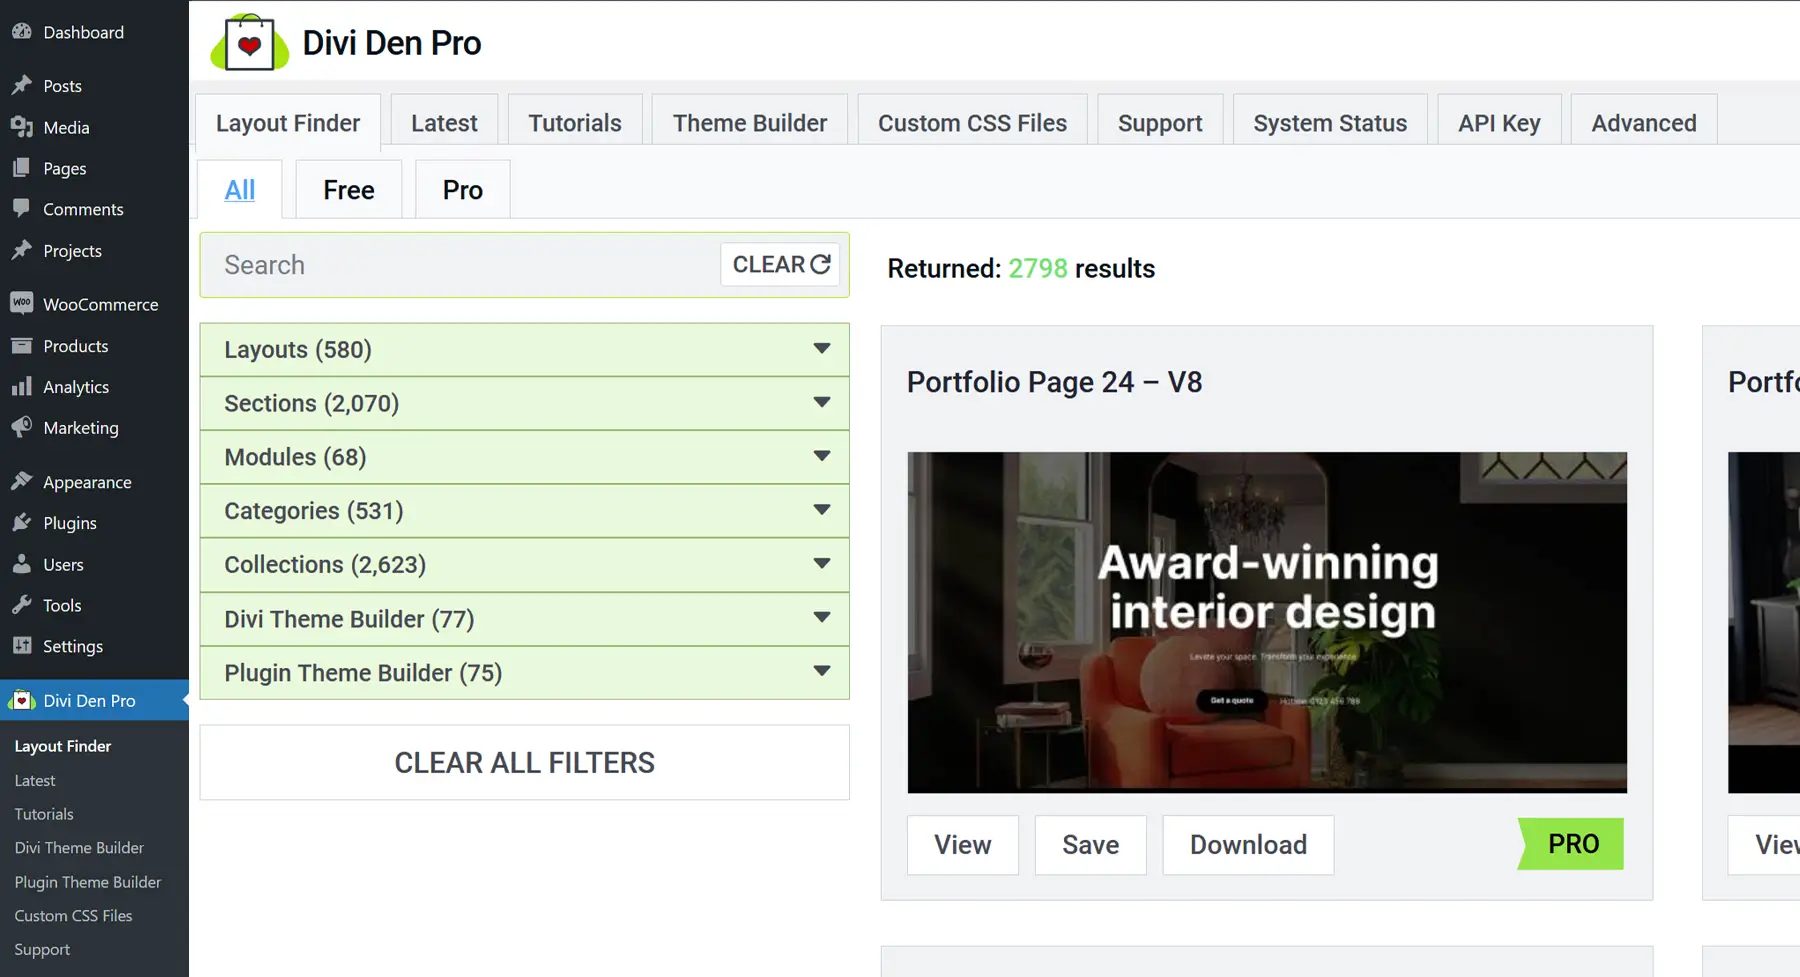 View of the Divi Den Pro Layout Finder from the Plugin Dashboard